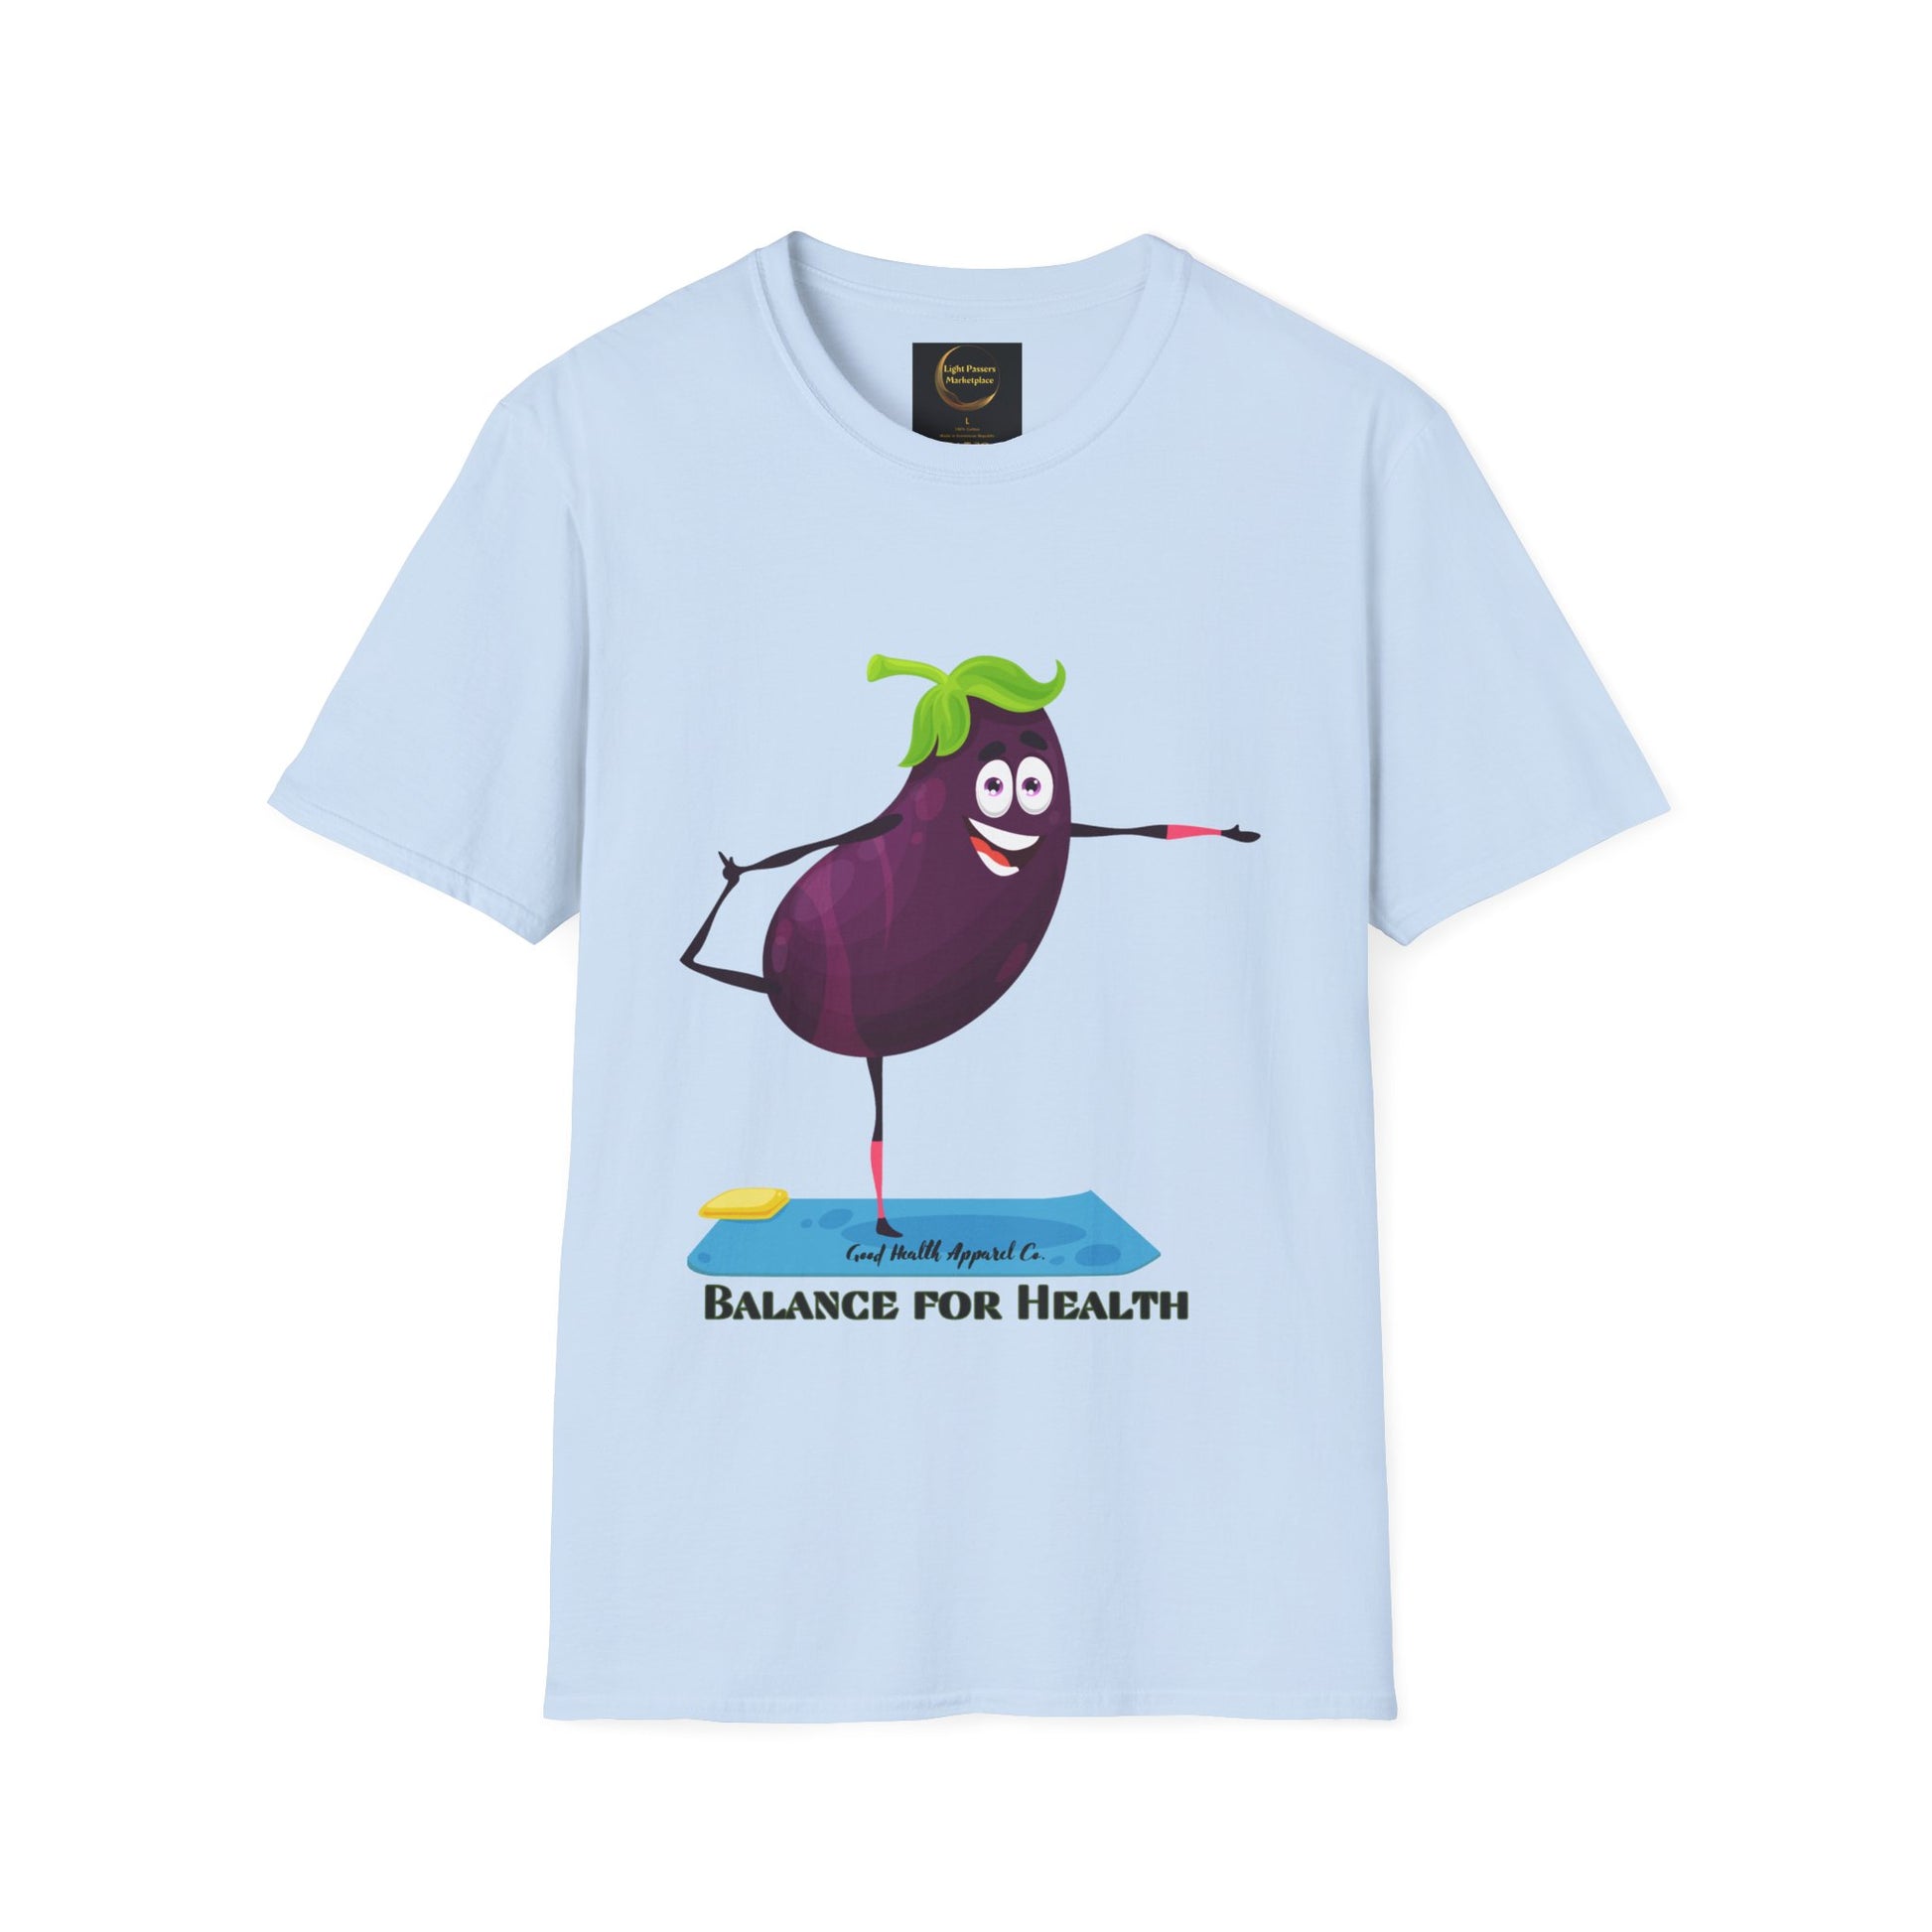 A soft-style unisex t-shirt featuring a cartoon eggplant balancing on one leg, made of 100% ring-spun cotton for comfort and durability. Ethically sourced and Oeko-Tex certified for quality.